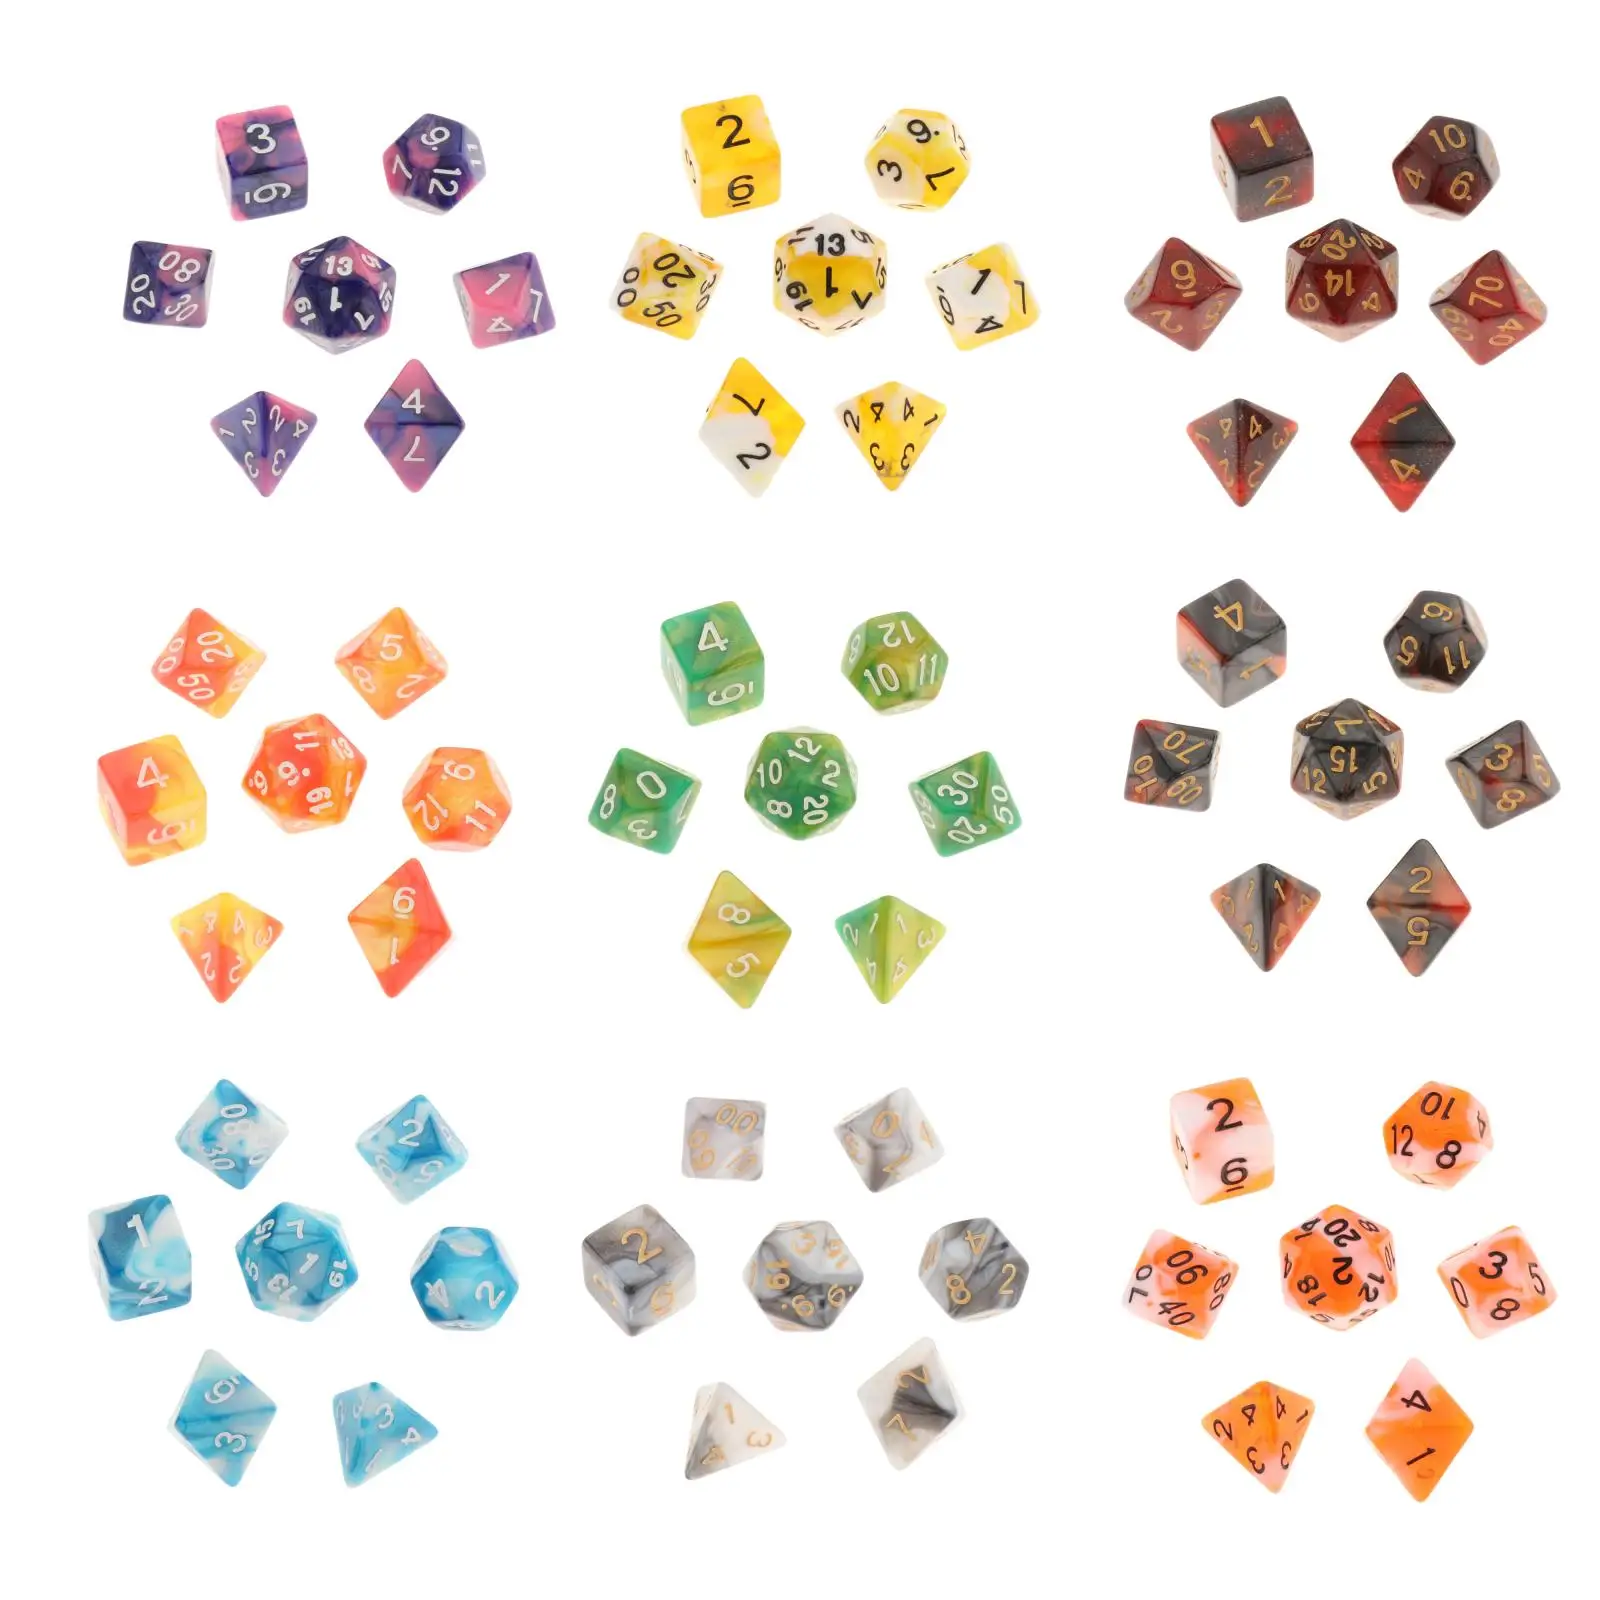 7Pcs Polyhedral Multi-sided Dice D4 D8 D10 D20 d&d Dice For RPG Dragons Game 